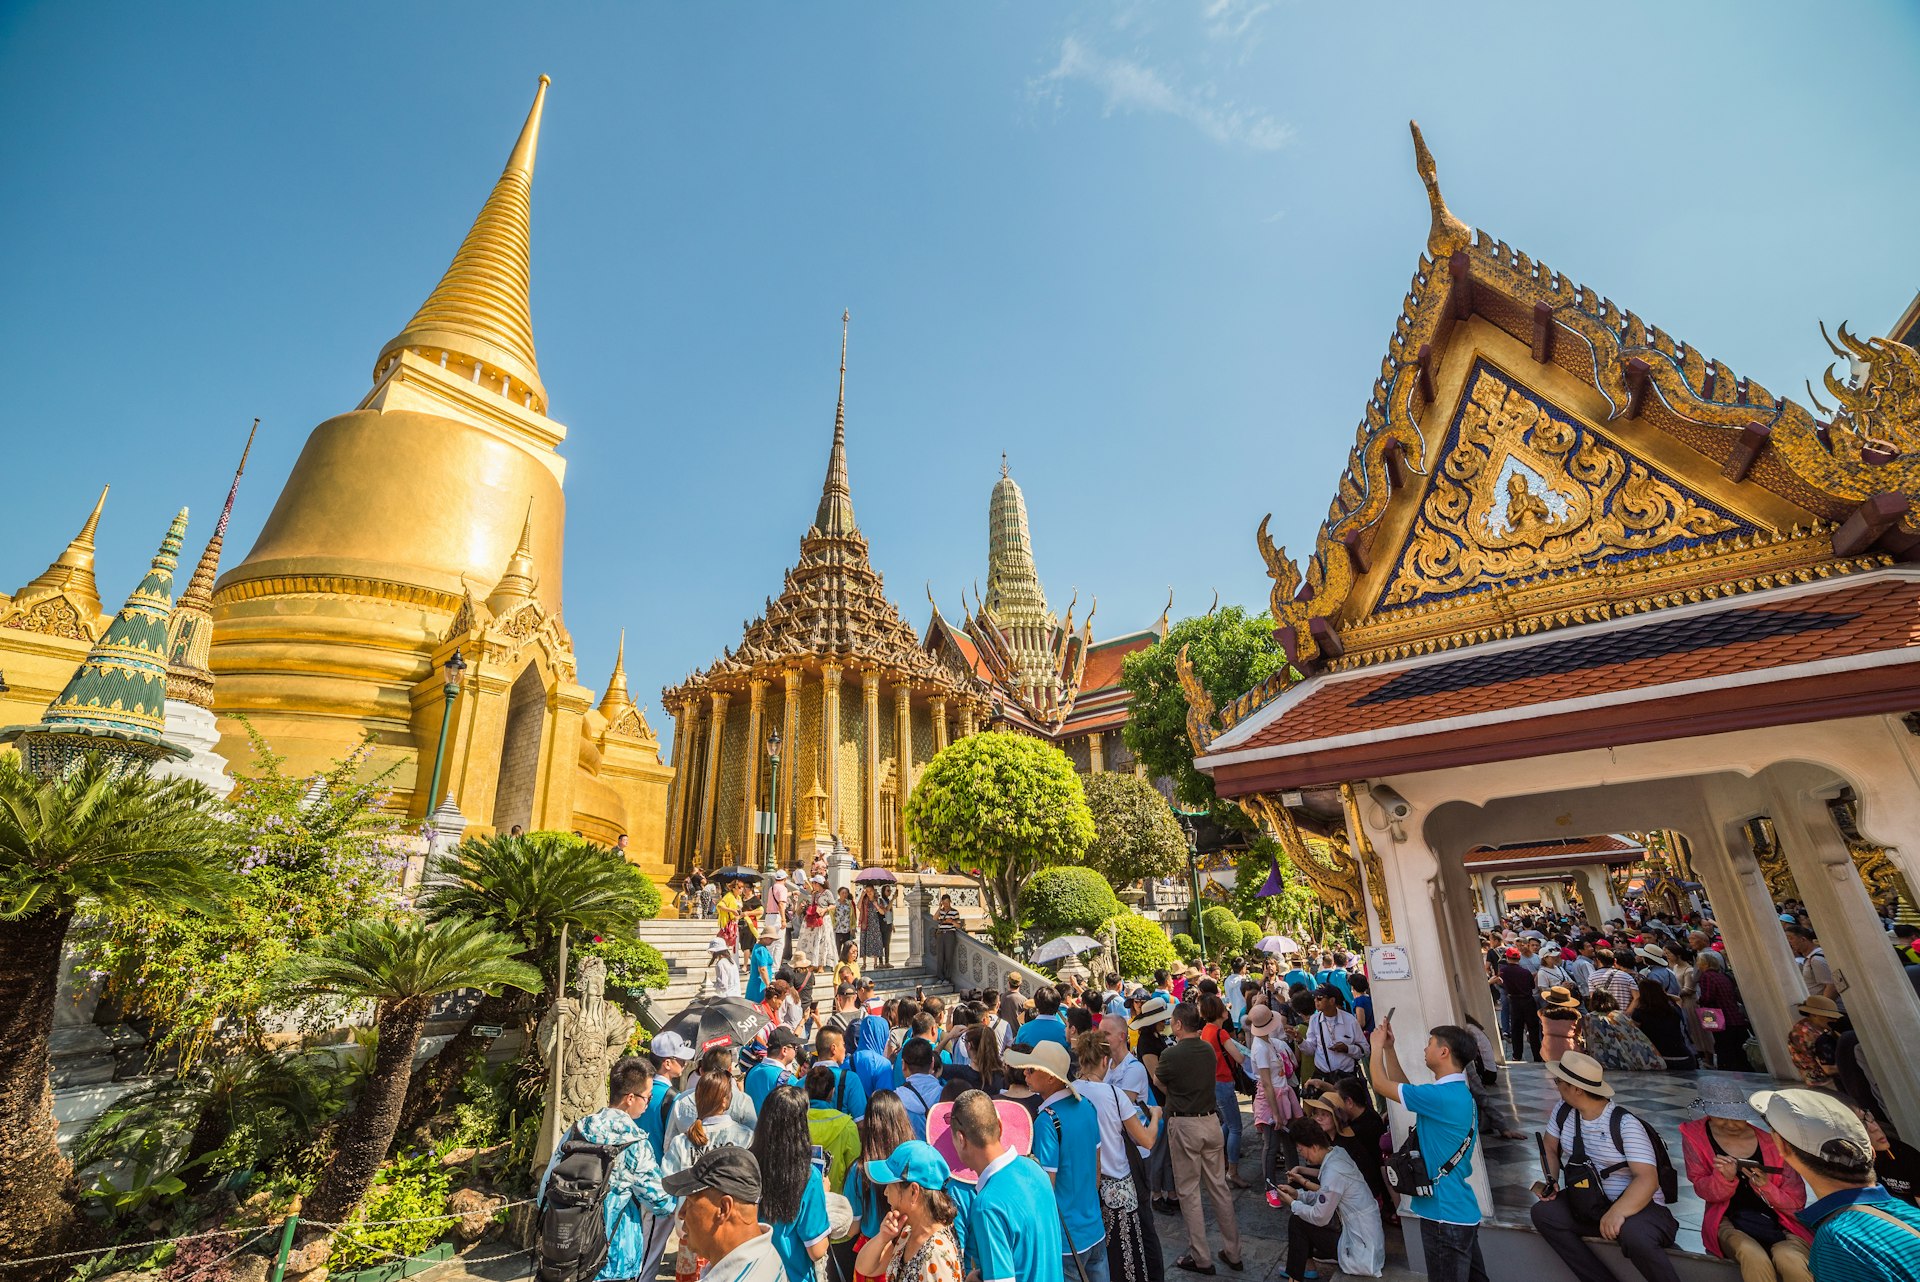 Many tourists gather in the Temple of Emerald Buddha at Bangkok's Grand Palace with a golden stupa in the left of the photo